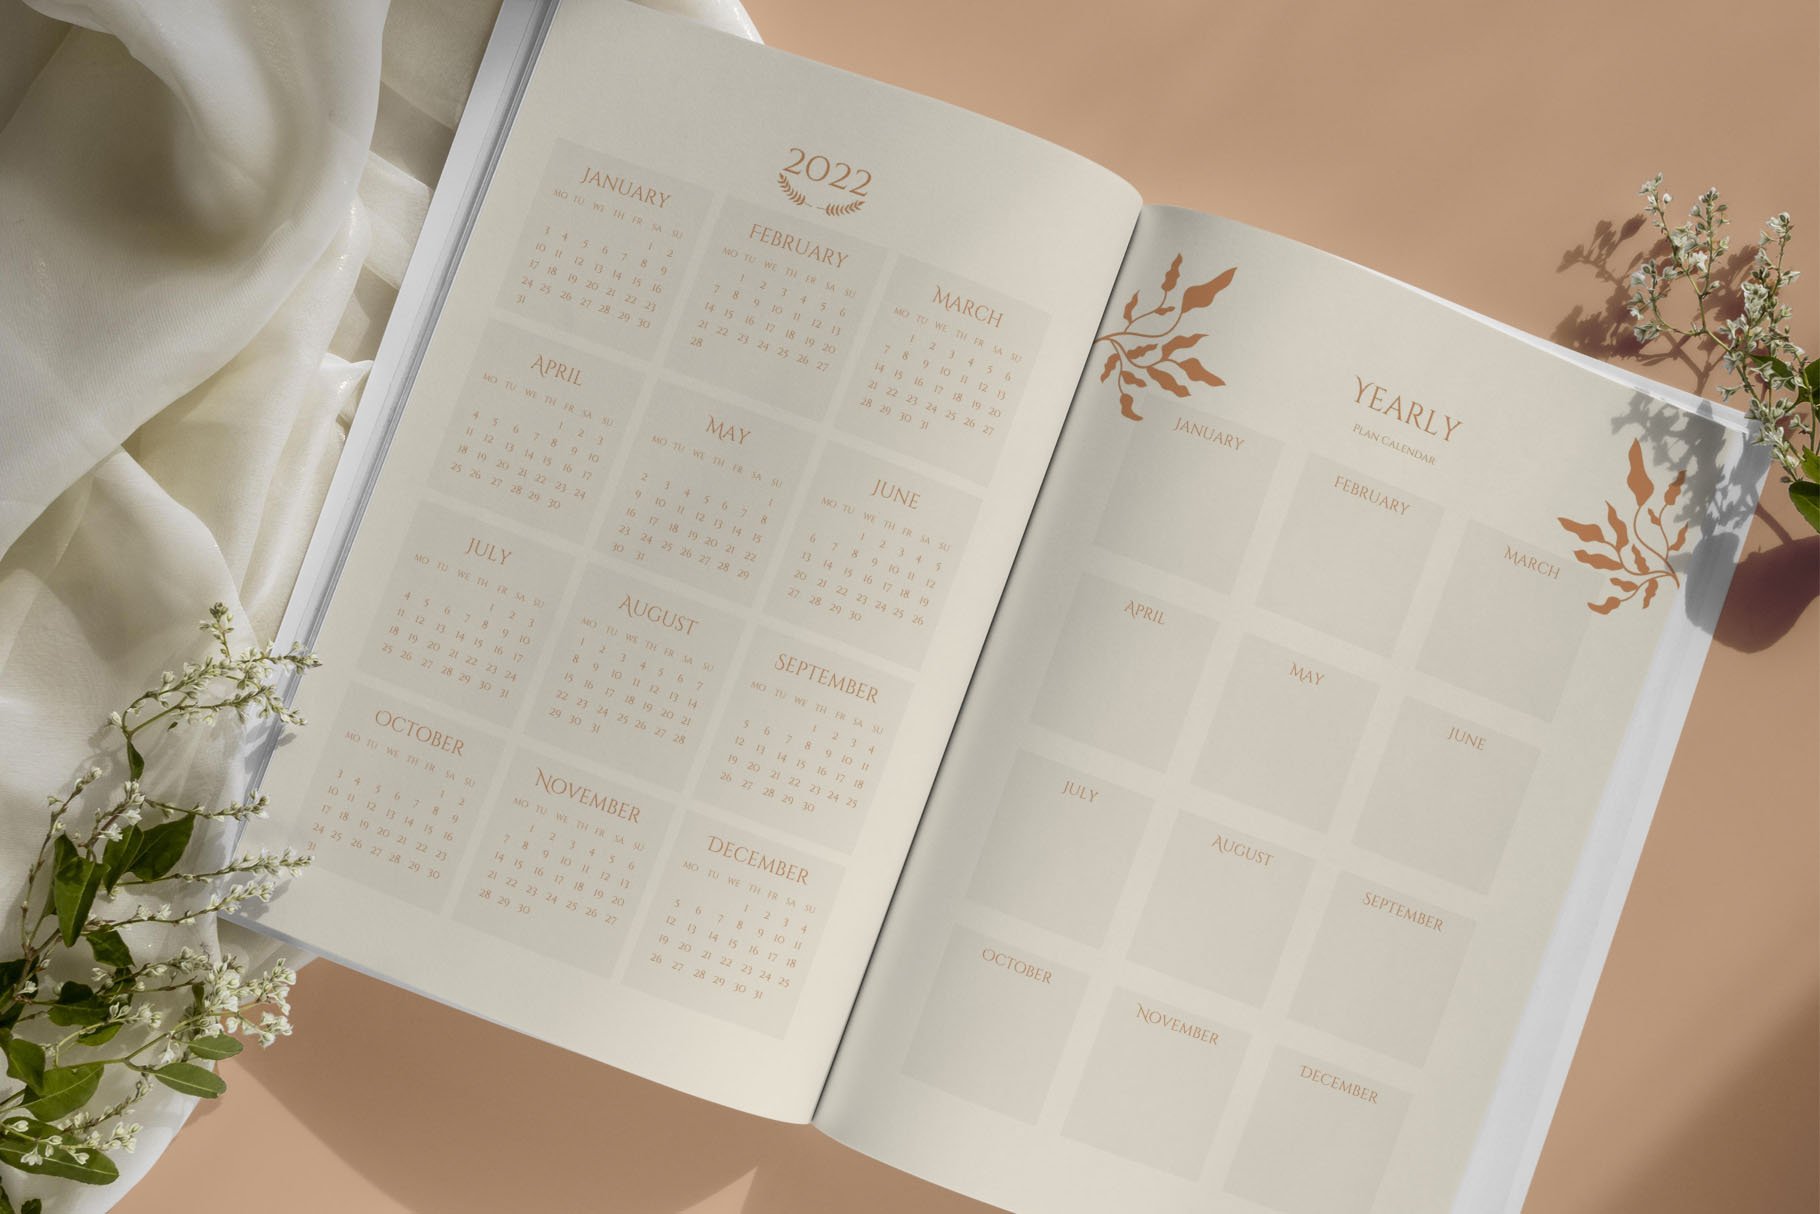 Cool and fully planner for you.